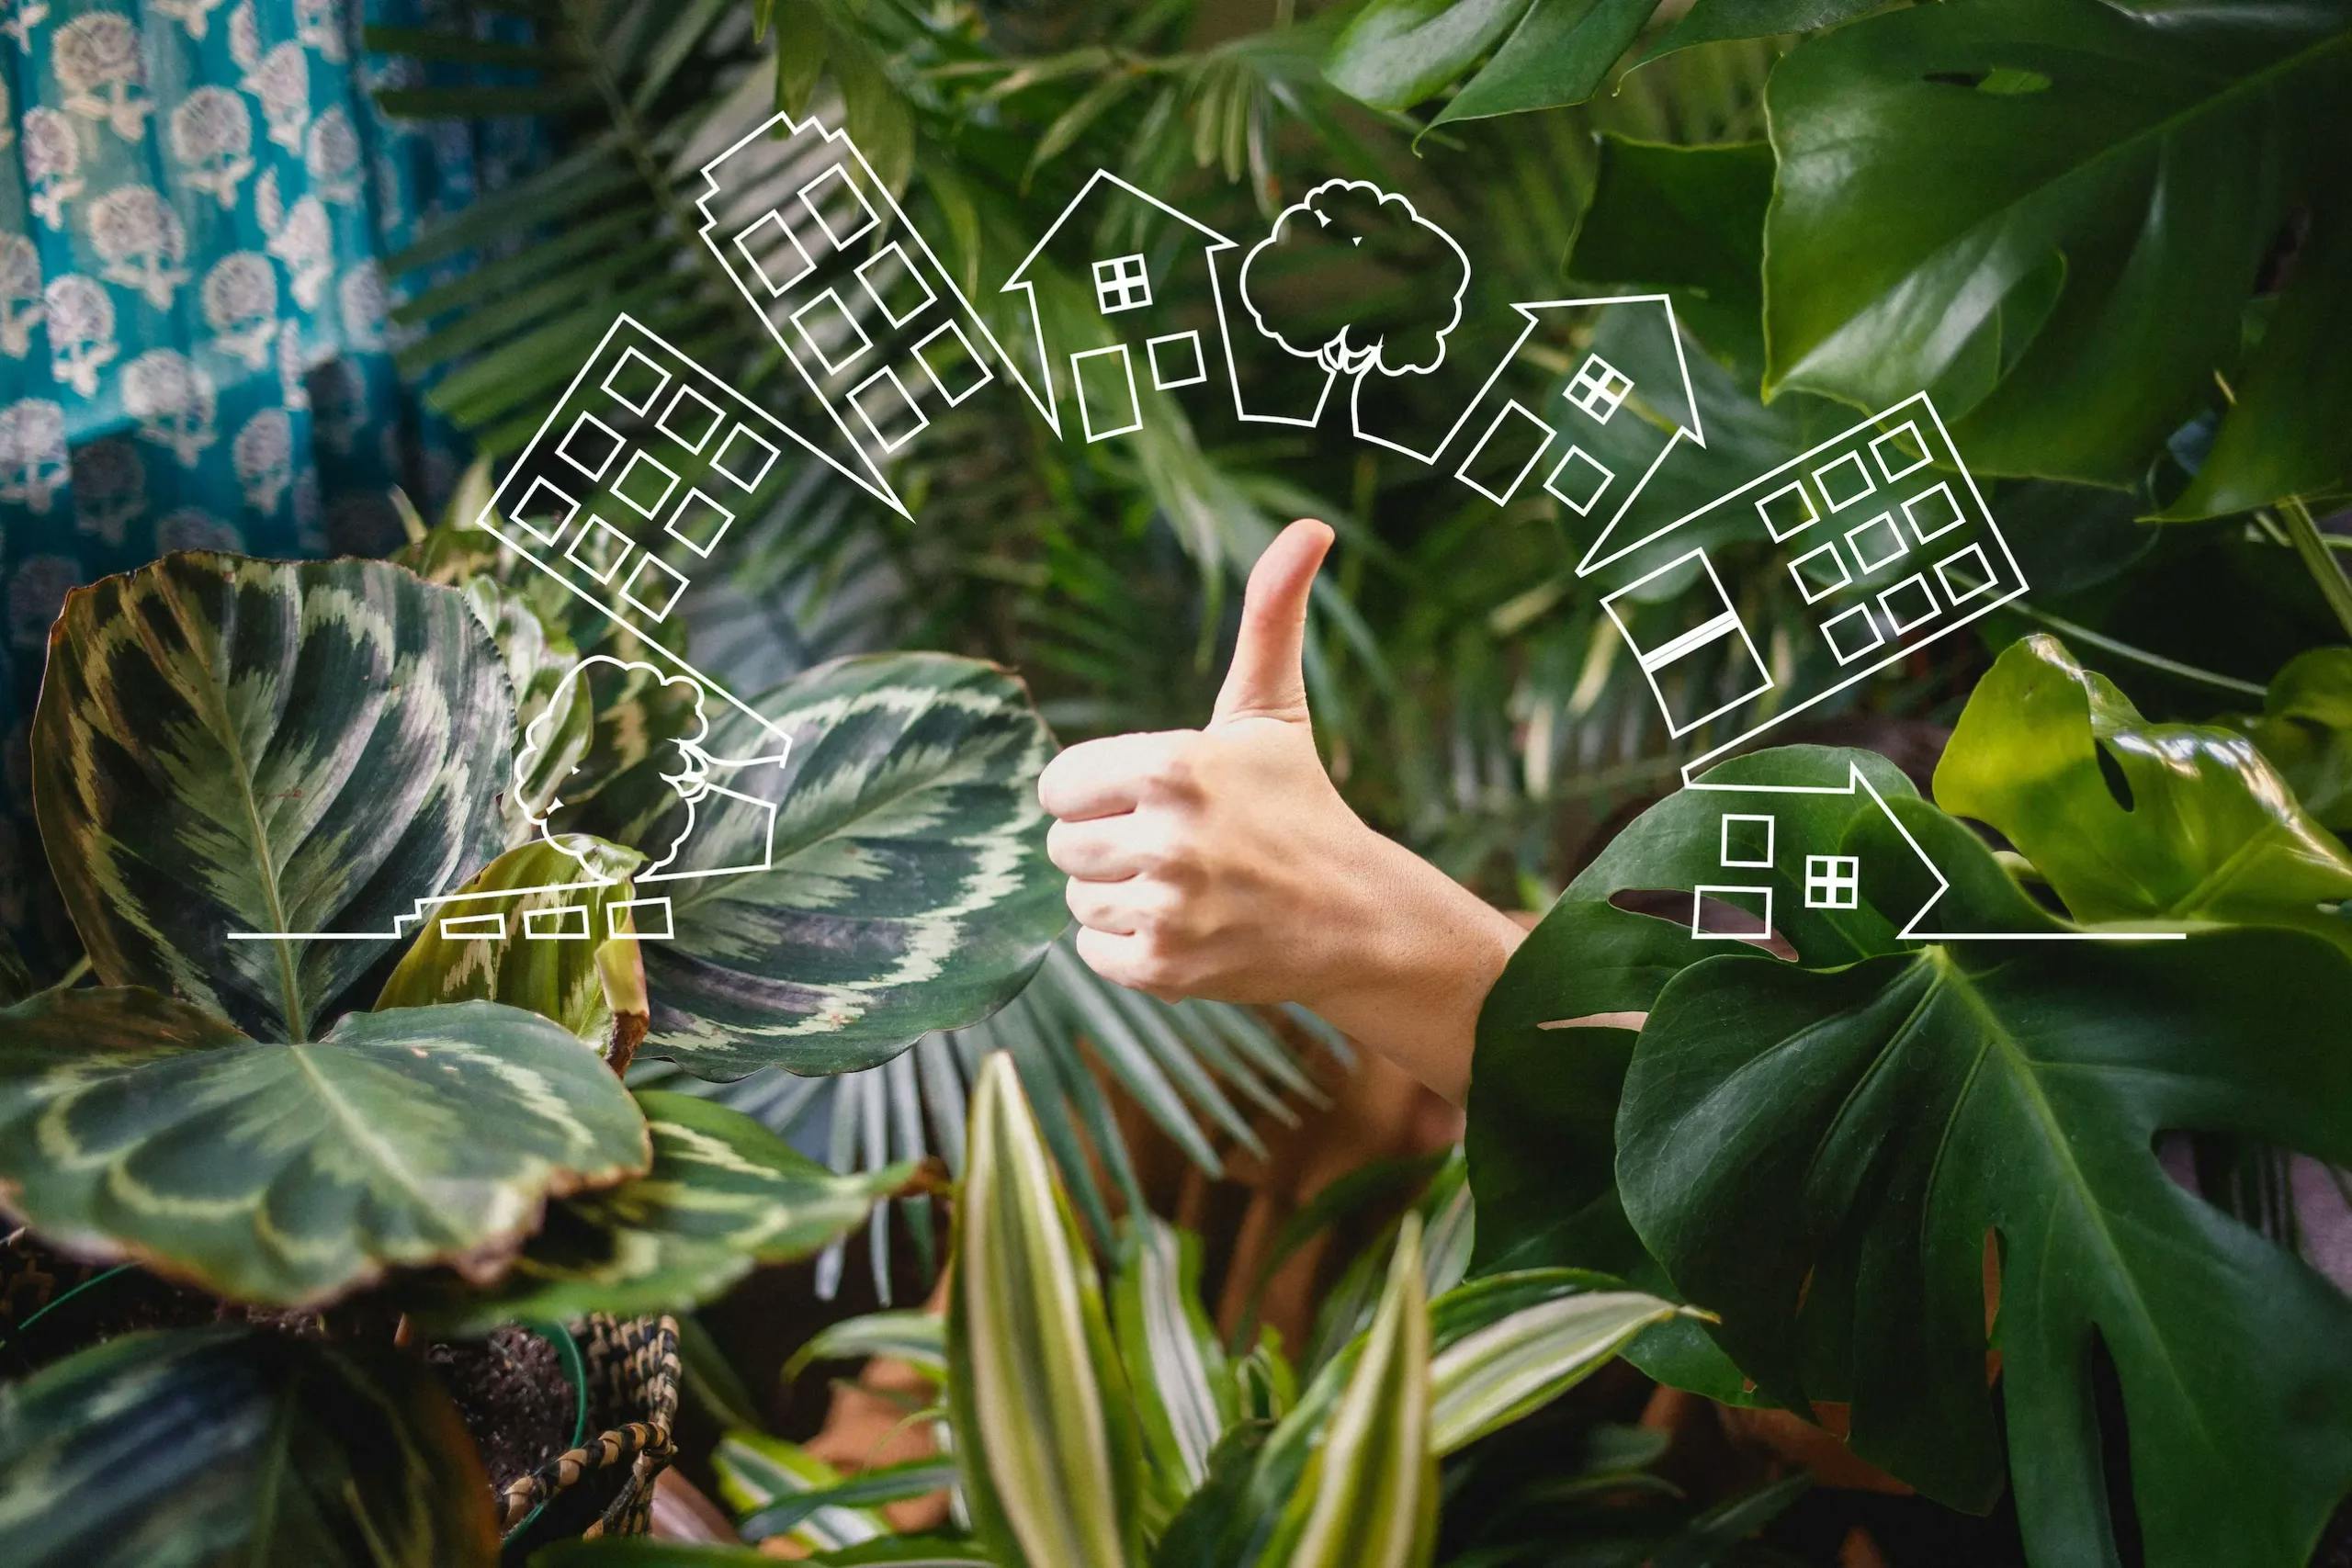 thumbs up hand amongst foliage with icons around